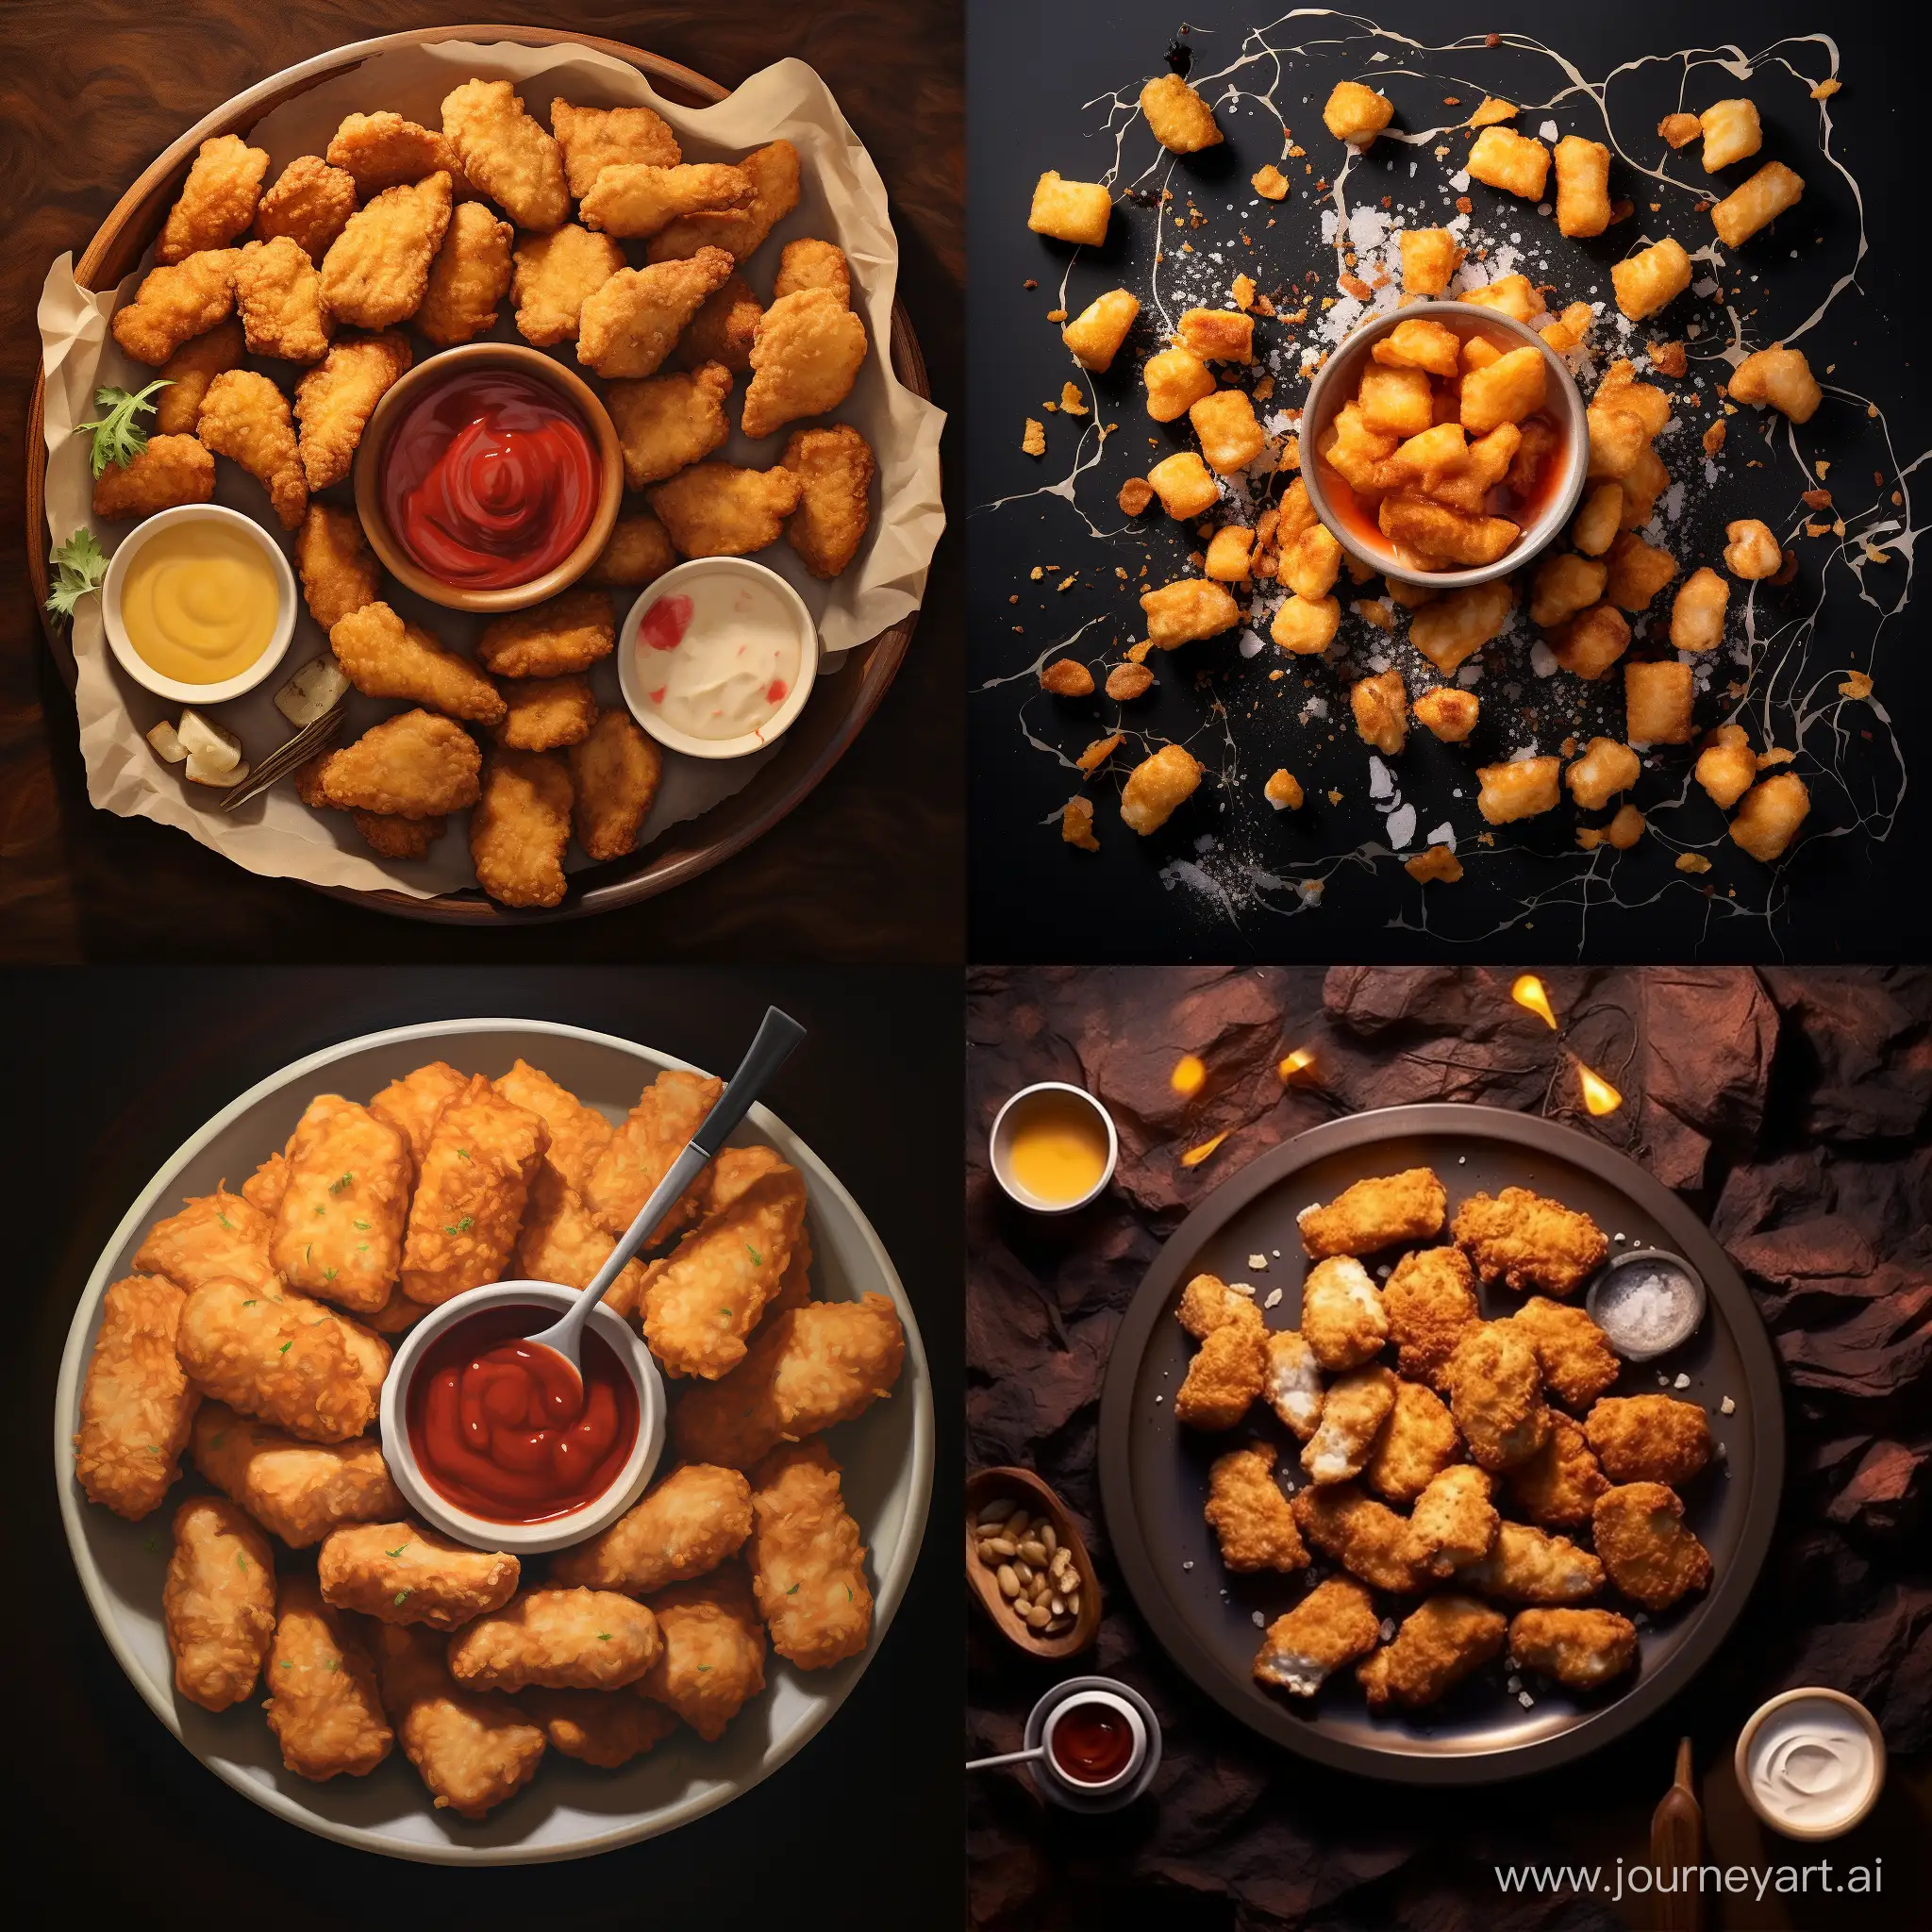 Delicious-Bitten-Nuggets-Arranged-in-Top-View